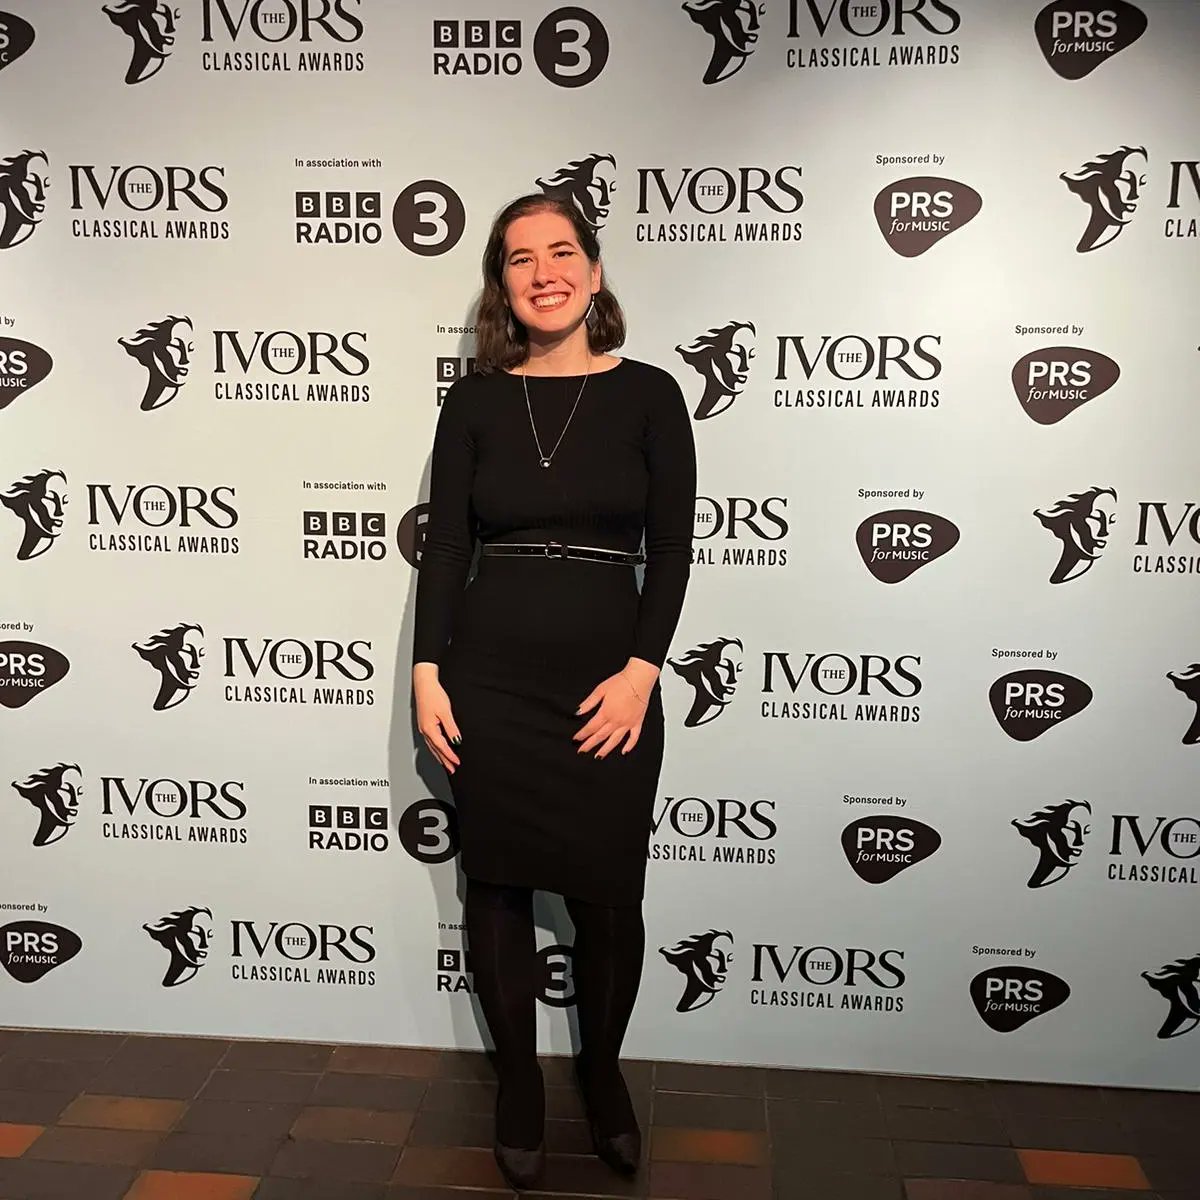 Thank you, @IvorsAcademy for a fun night yesterday at the #IvorsClassicalAwards! So honoured and privileged to have been included in this year's nominees! Congratulations to all winners!